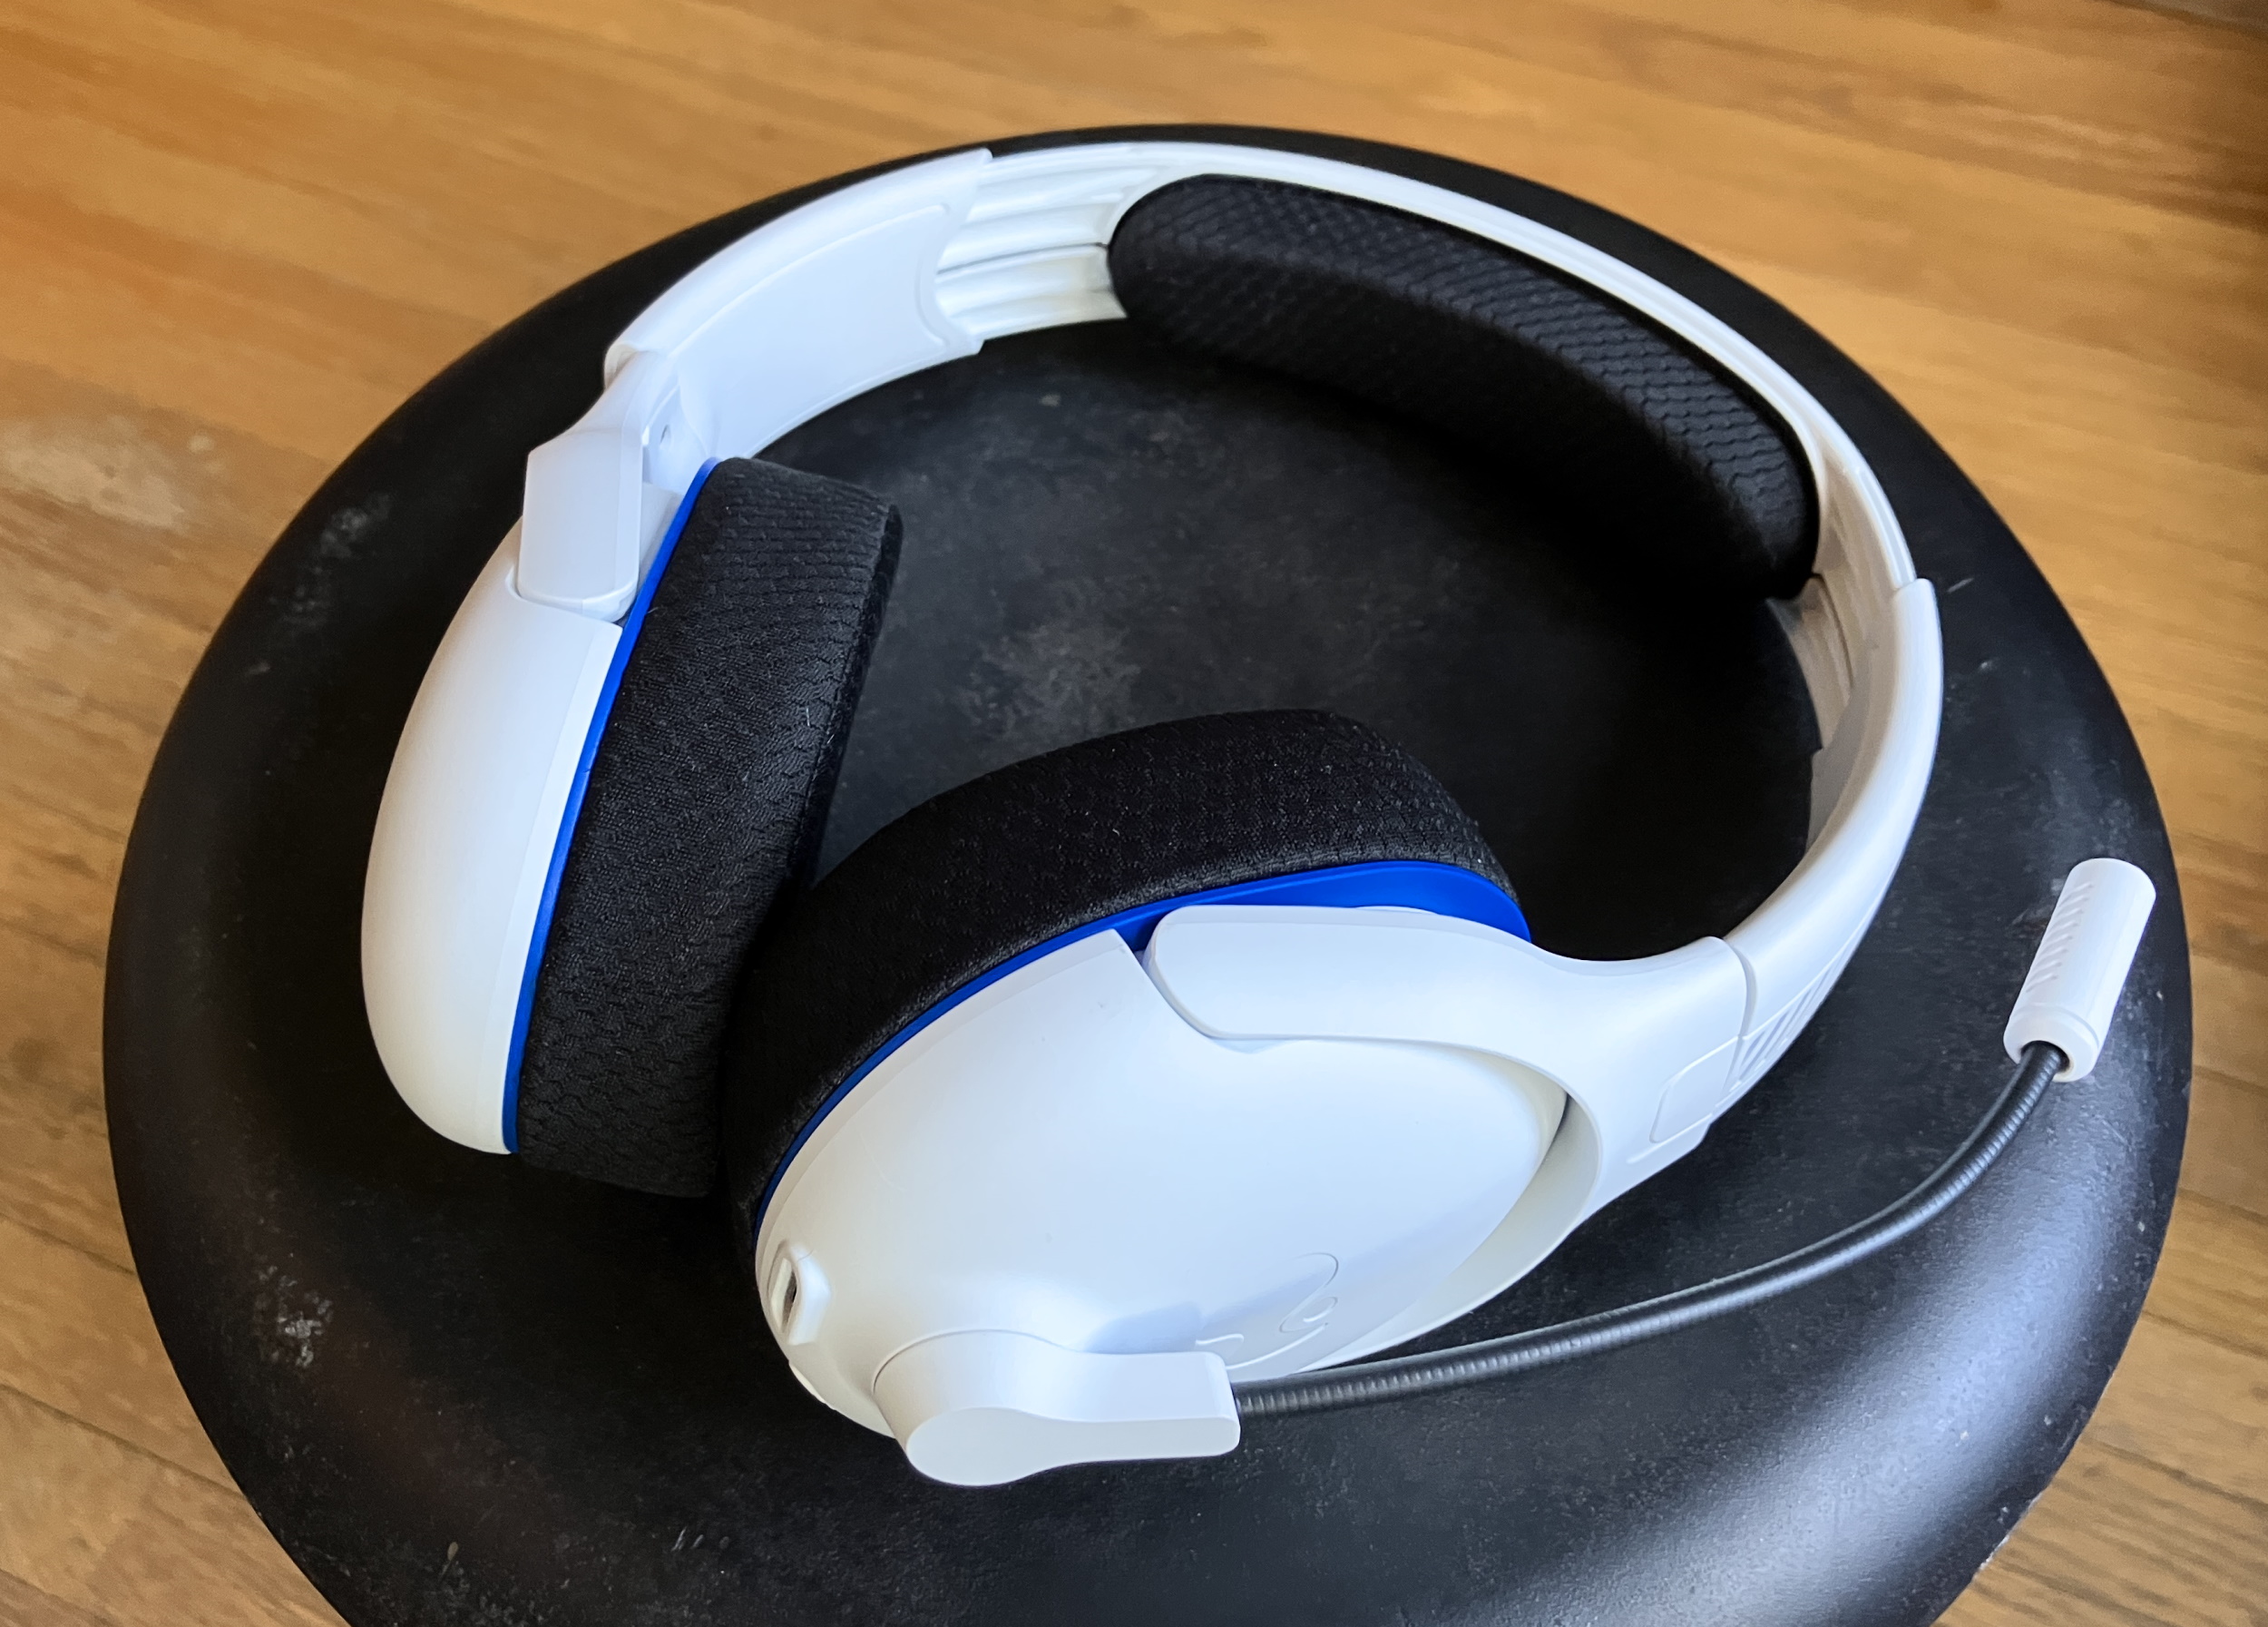 PDP LVL50 Headset Review: Solid Wireless Gaming Sound for $80